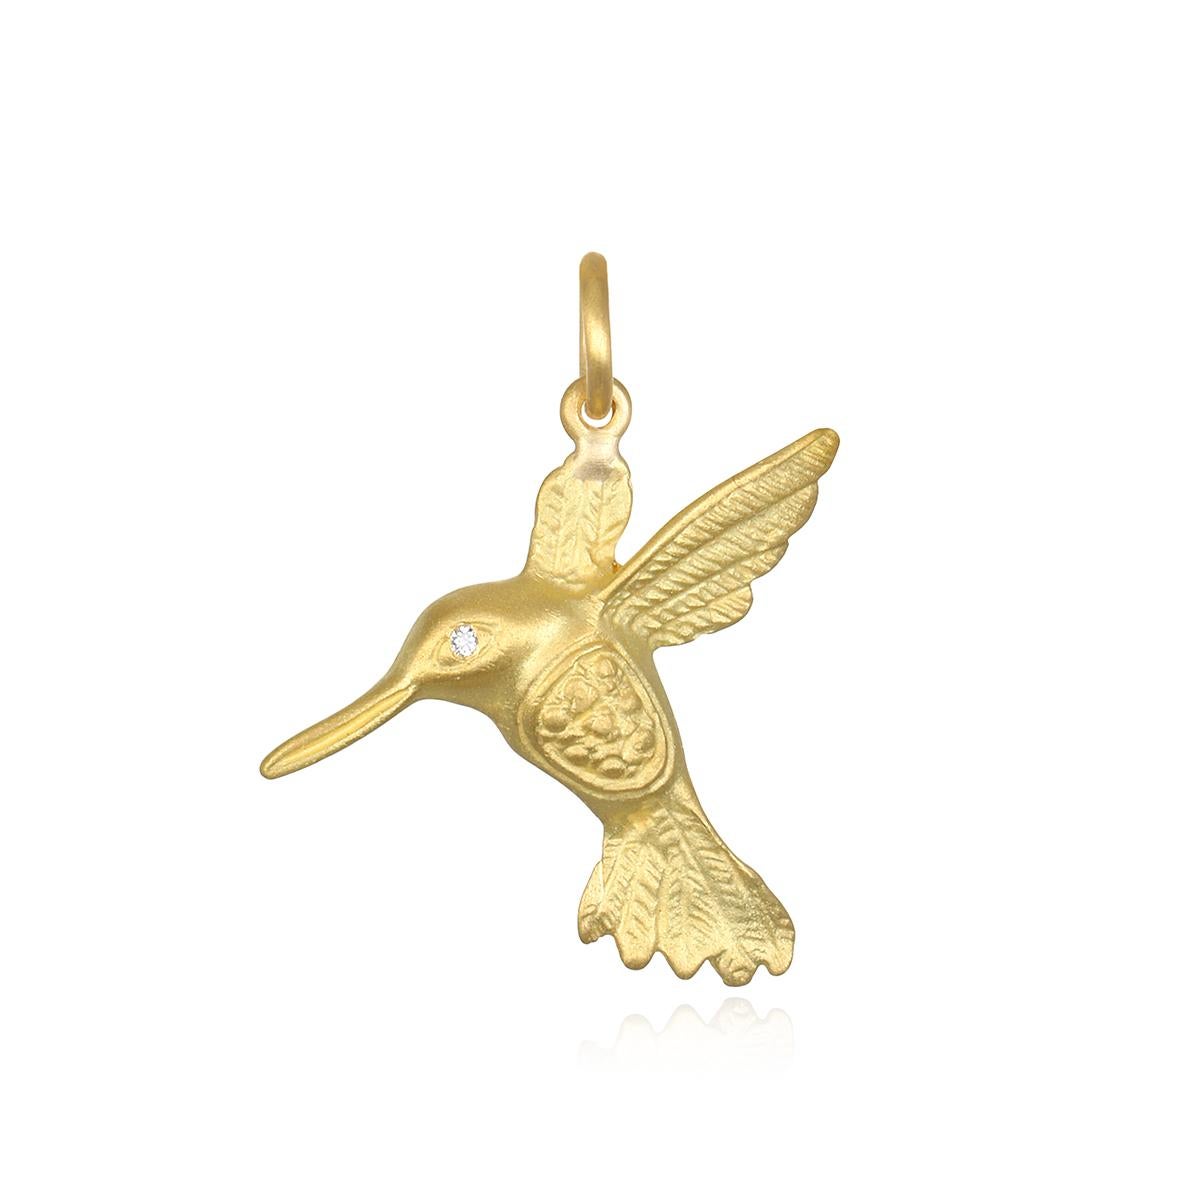 Faye Kim's 18 Karat Gold Hummingbird, part of the designer's Signature Charm Collection, features a sparkly diamond eye and can be sold separately from the chain or soldered onto one of our wire bangles. Each charm makes a design statement on its